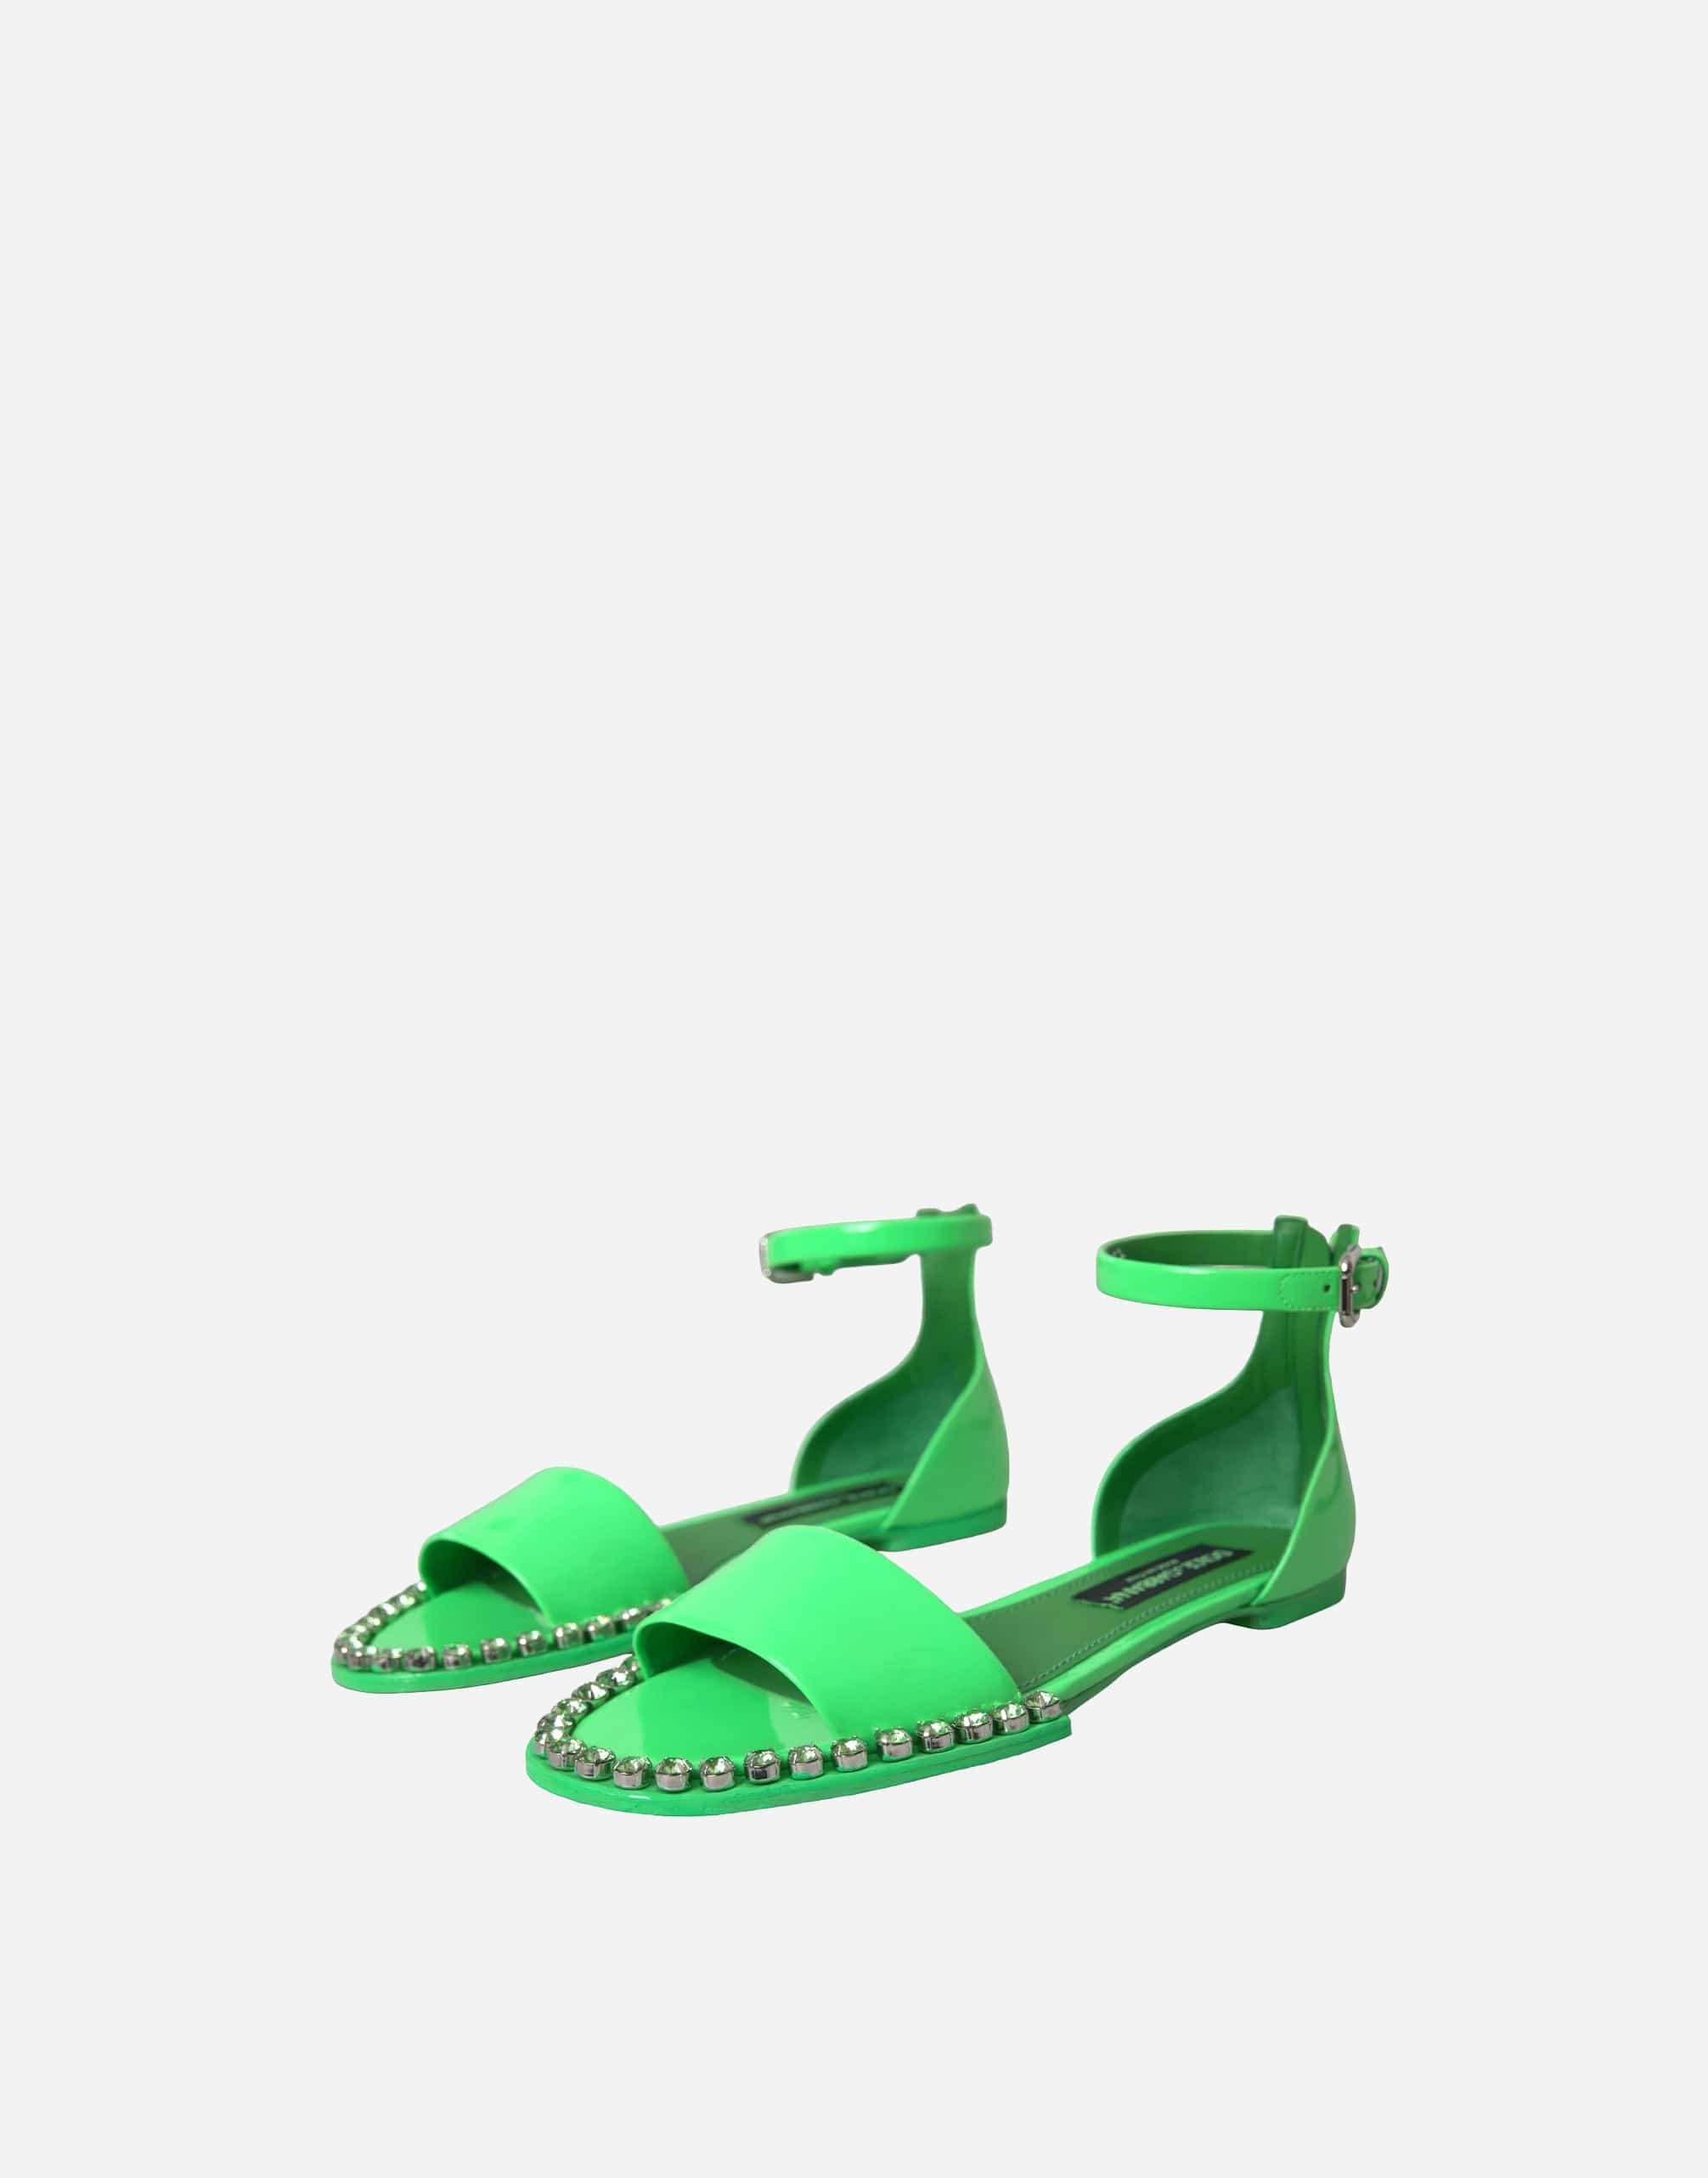 Dolce & Gabbana Neon Green Crystal Ankle Strap Sandals Shoes